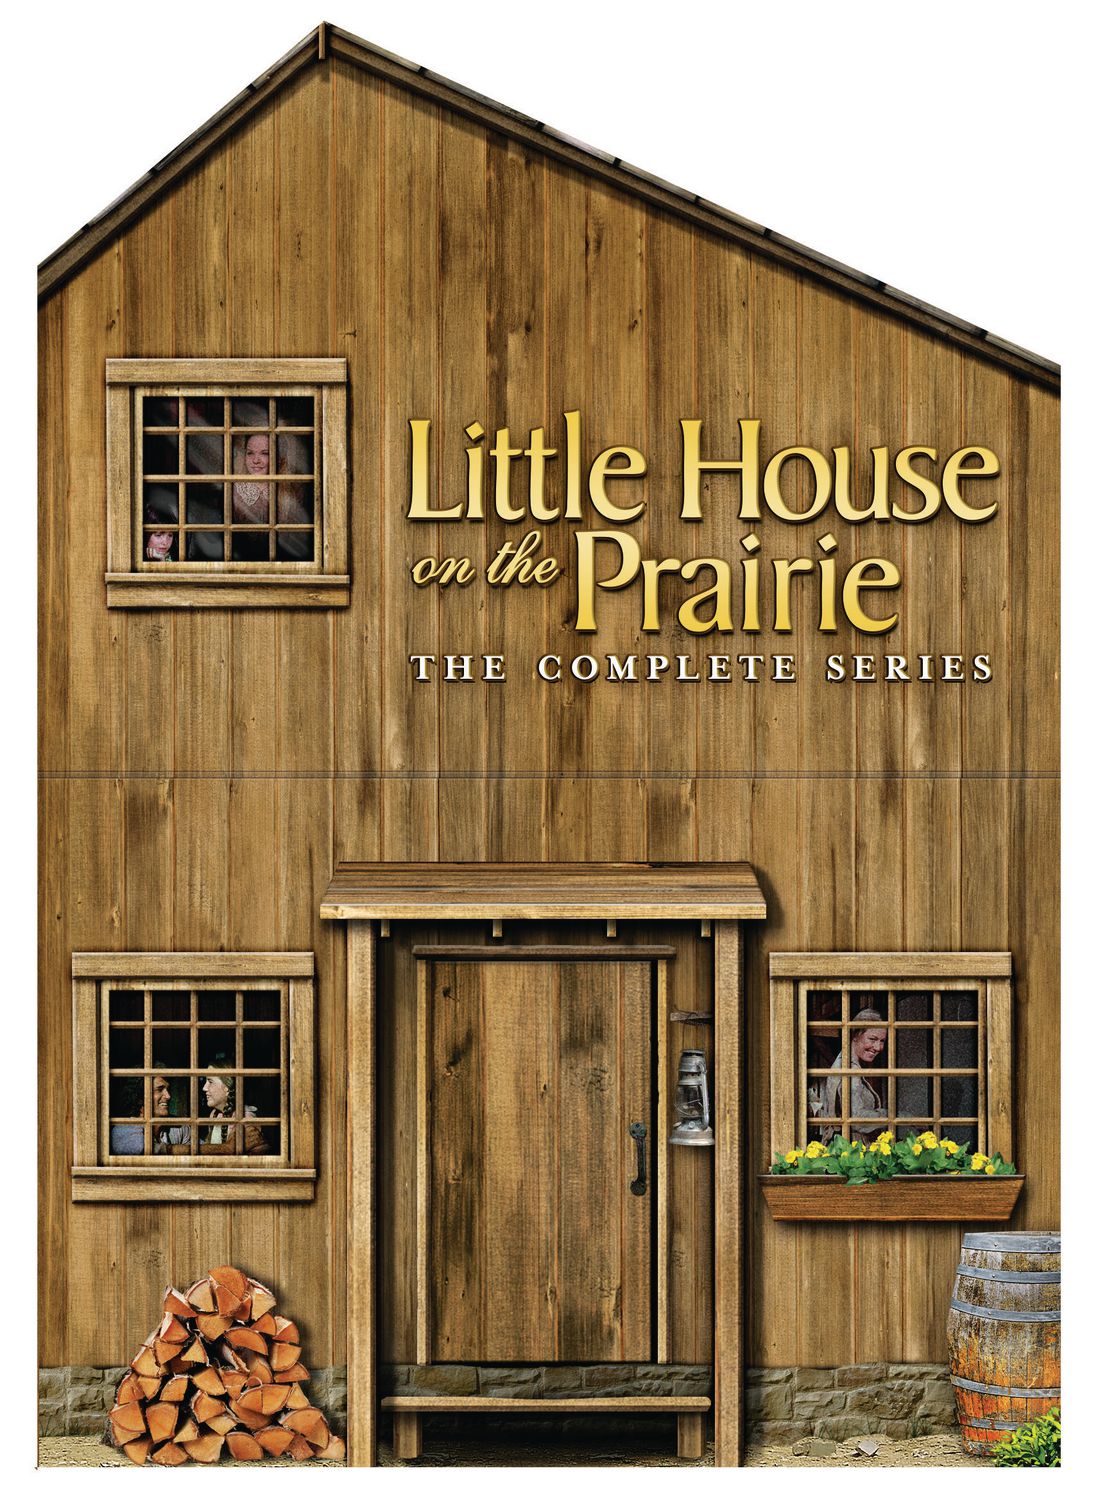 little house on the prairie complete torrent free download